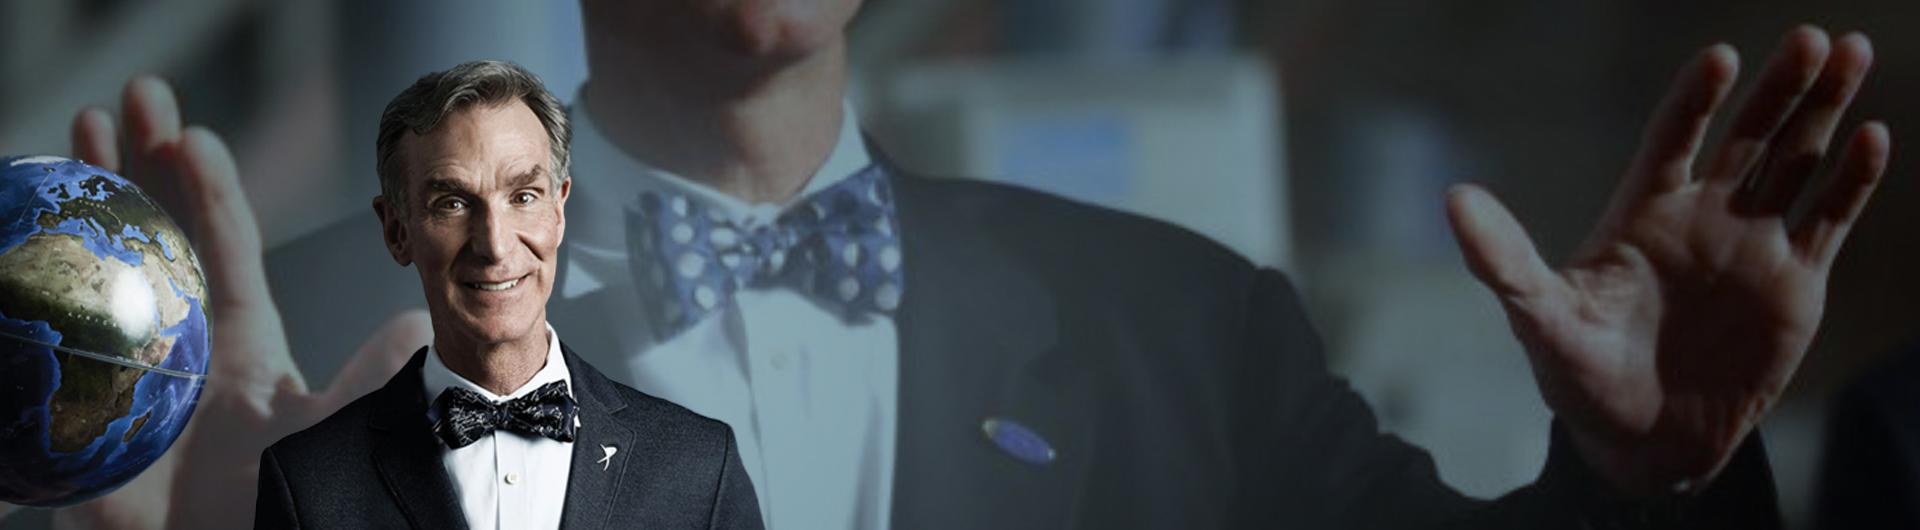 Bill Nye in a suit and bow tie.